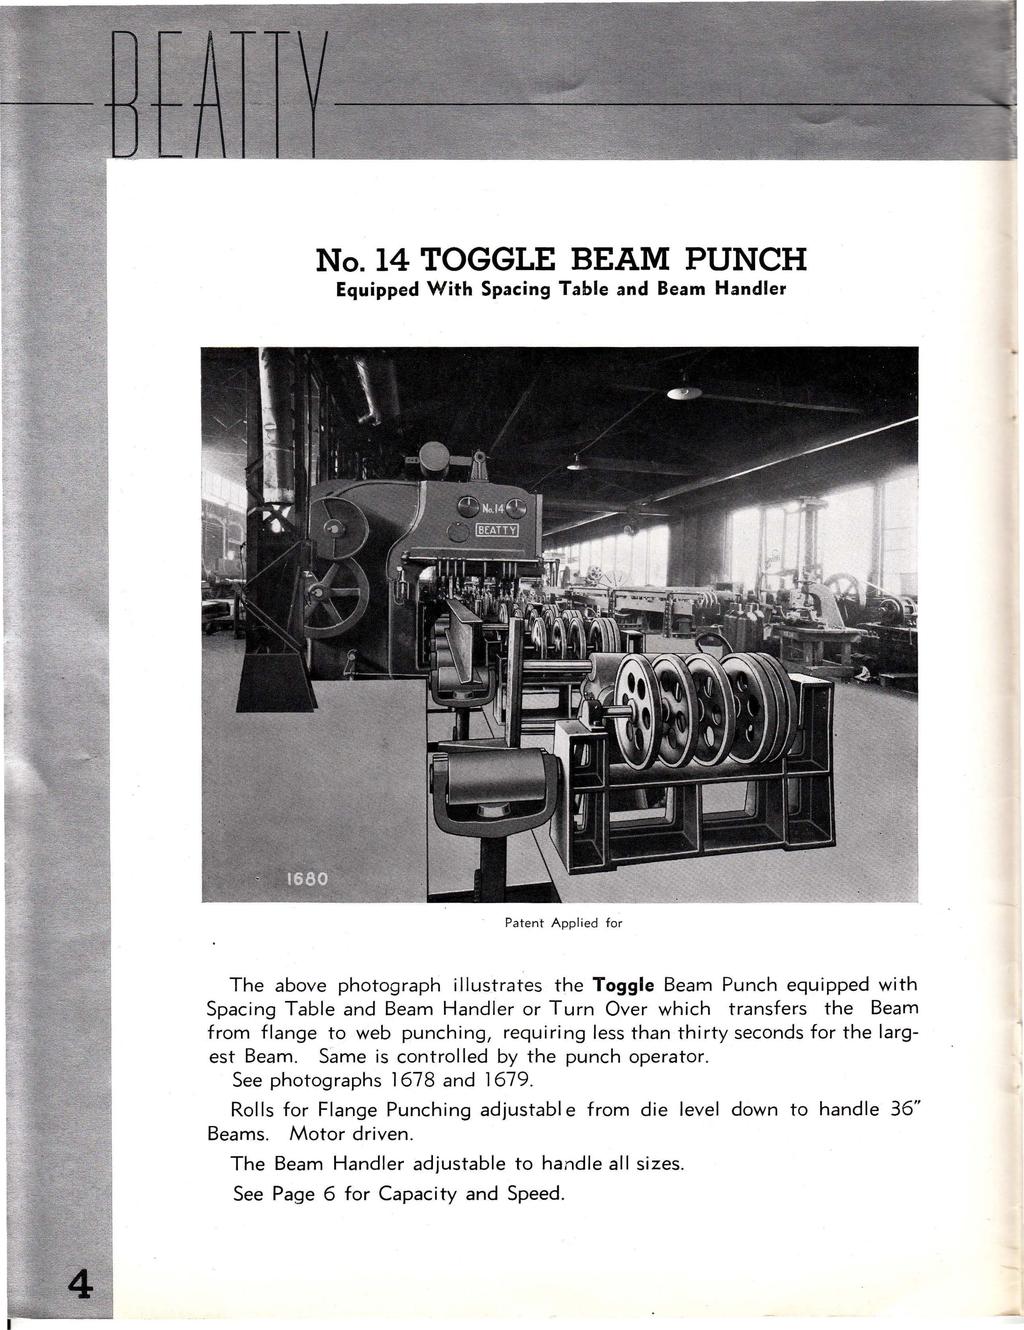 No. 14 TOGGLE BEAM PUNCH Equipped With Spacing Table and Beam Handler Patent Appl ied for The above photograph illustrates the Toggle Beam Punch equipped with Spacing Table and Beam Handler or Turn